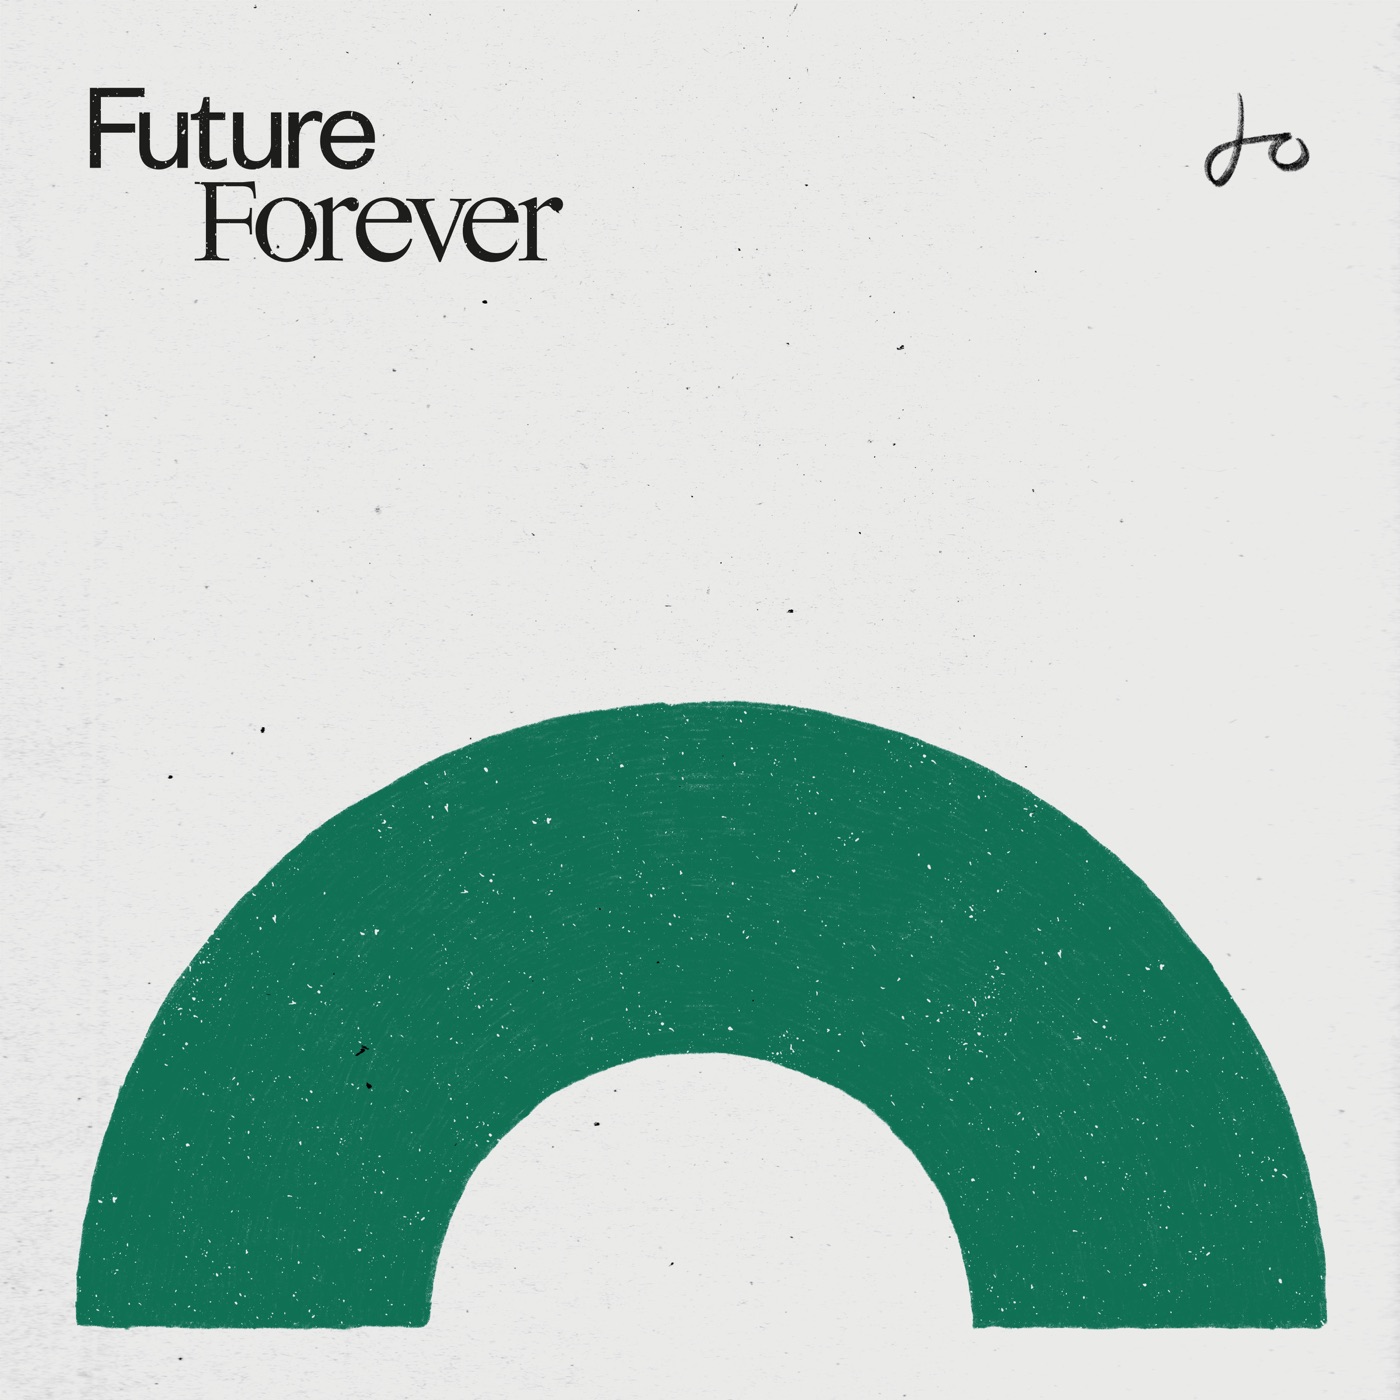 Future Forever by Jonathan Ogden